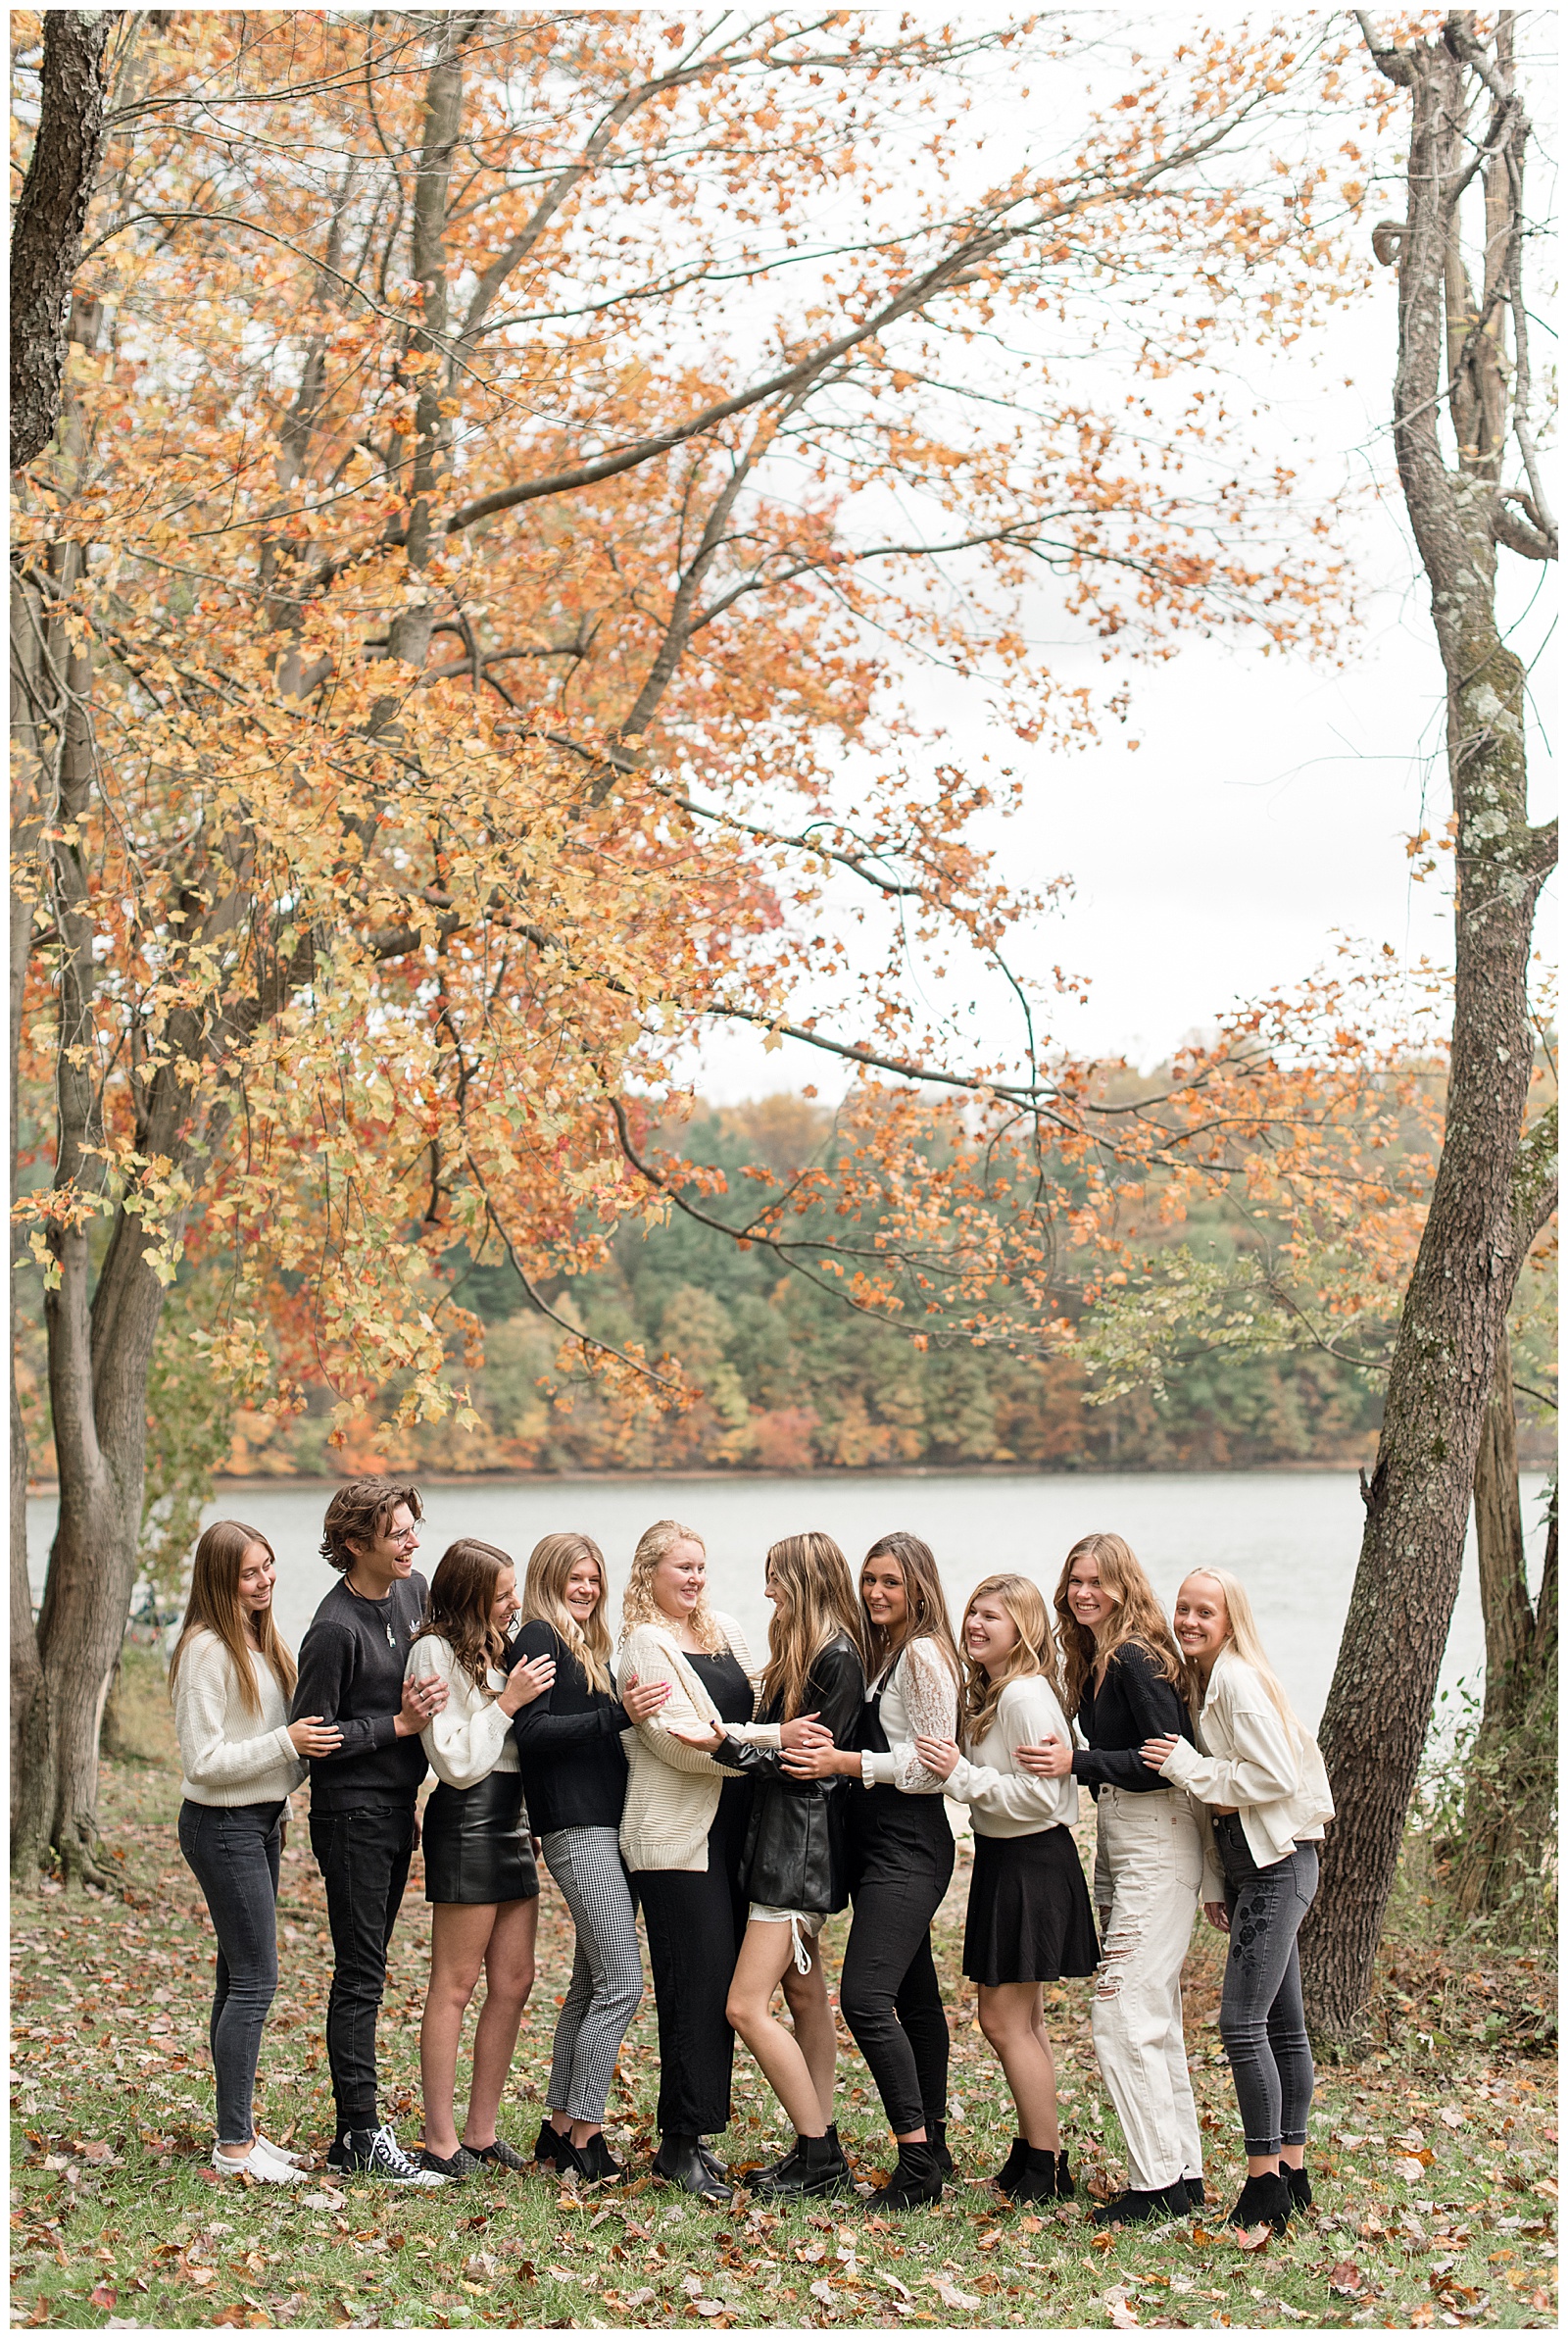 ten class of 2022 senior spokesmodels all huddled together under colorful fall tree at reservoir park in york pennsylvania